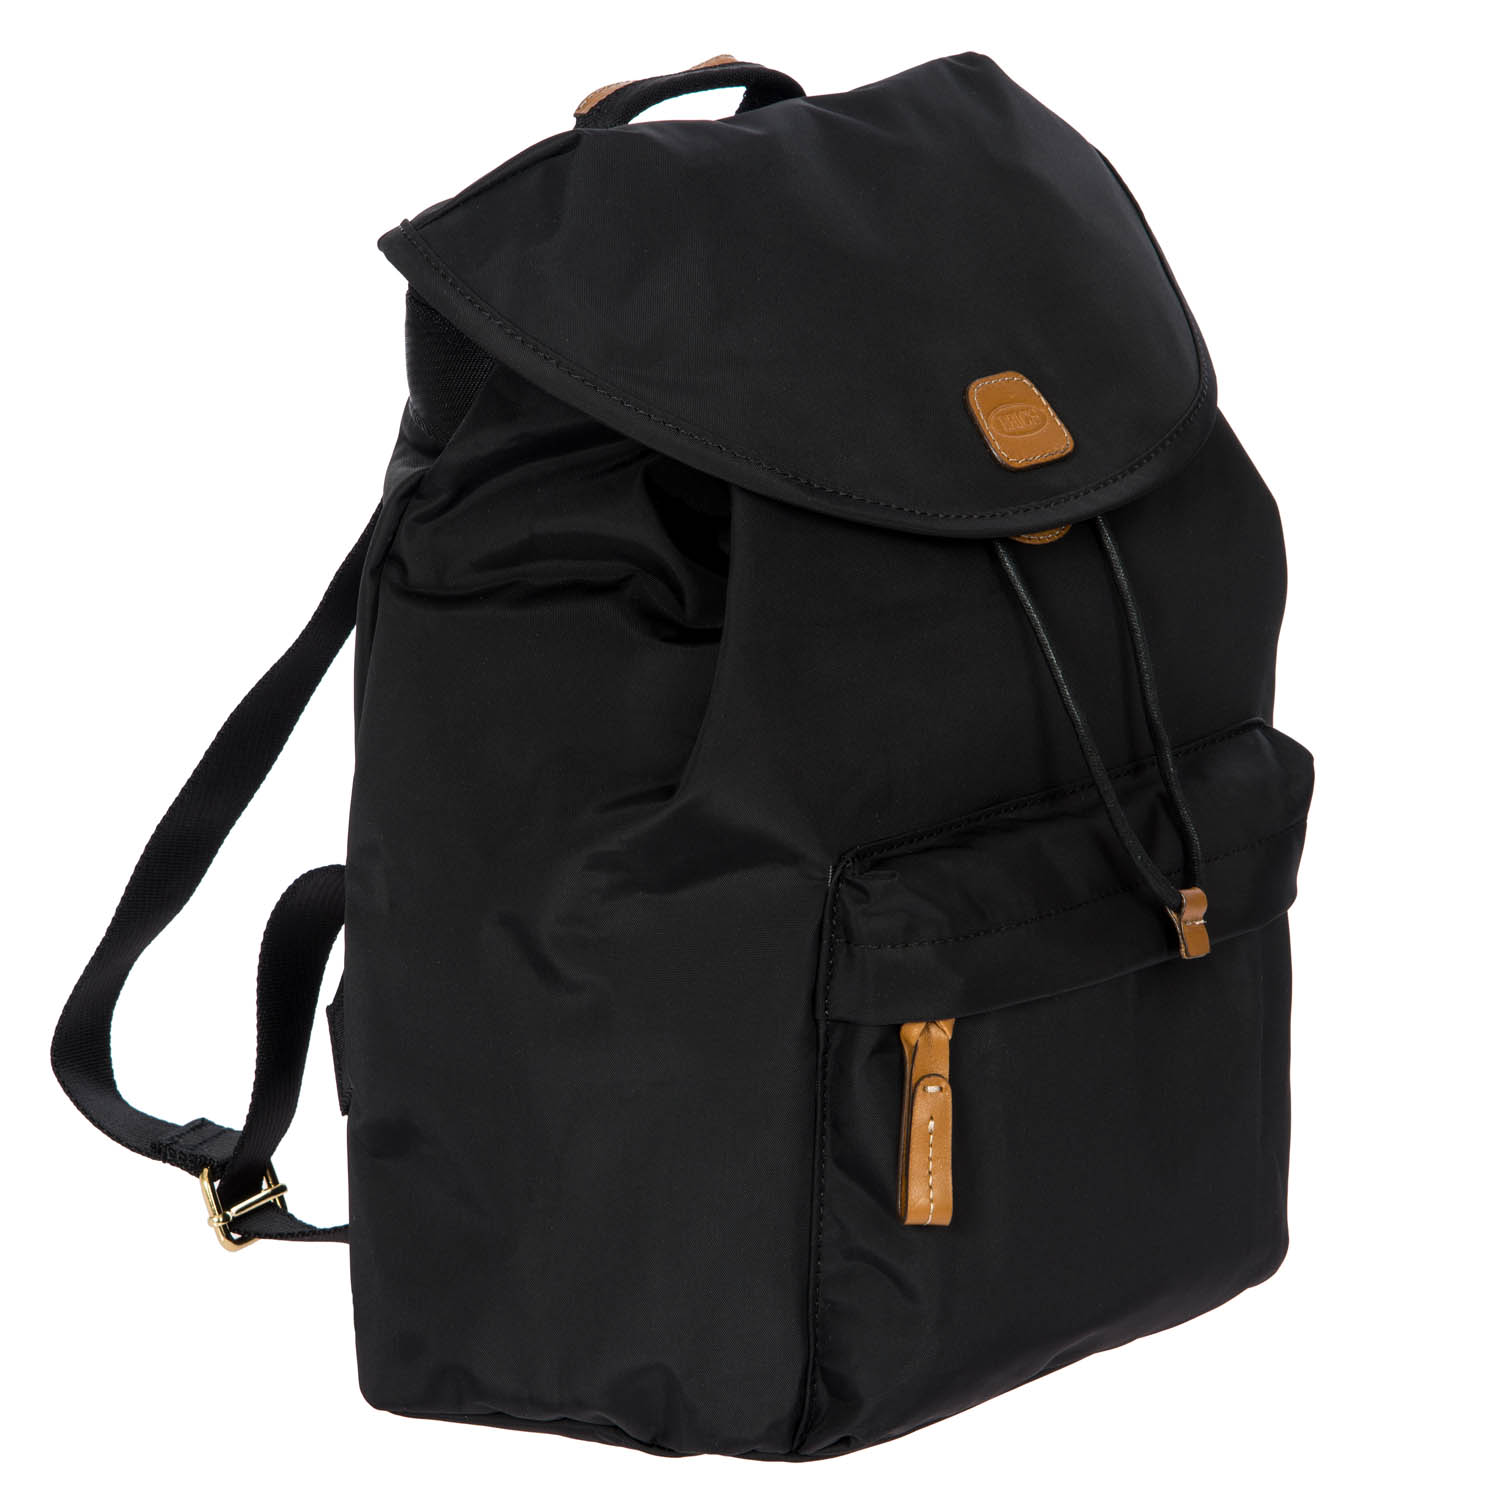 BRIC'S X-travel Backpack BXL40597